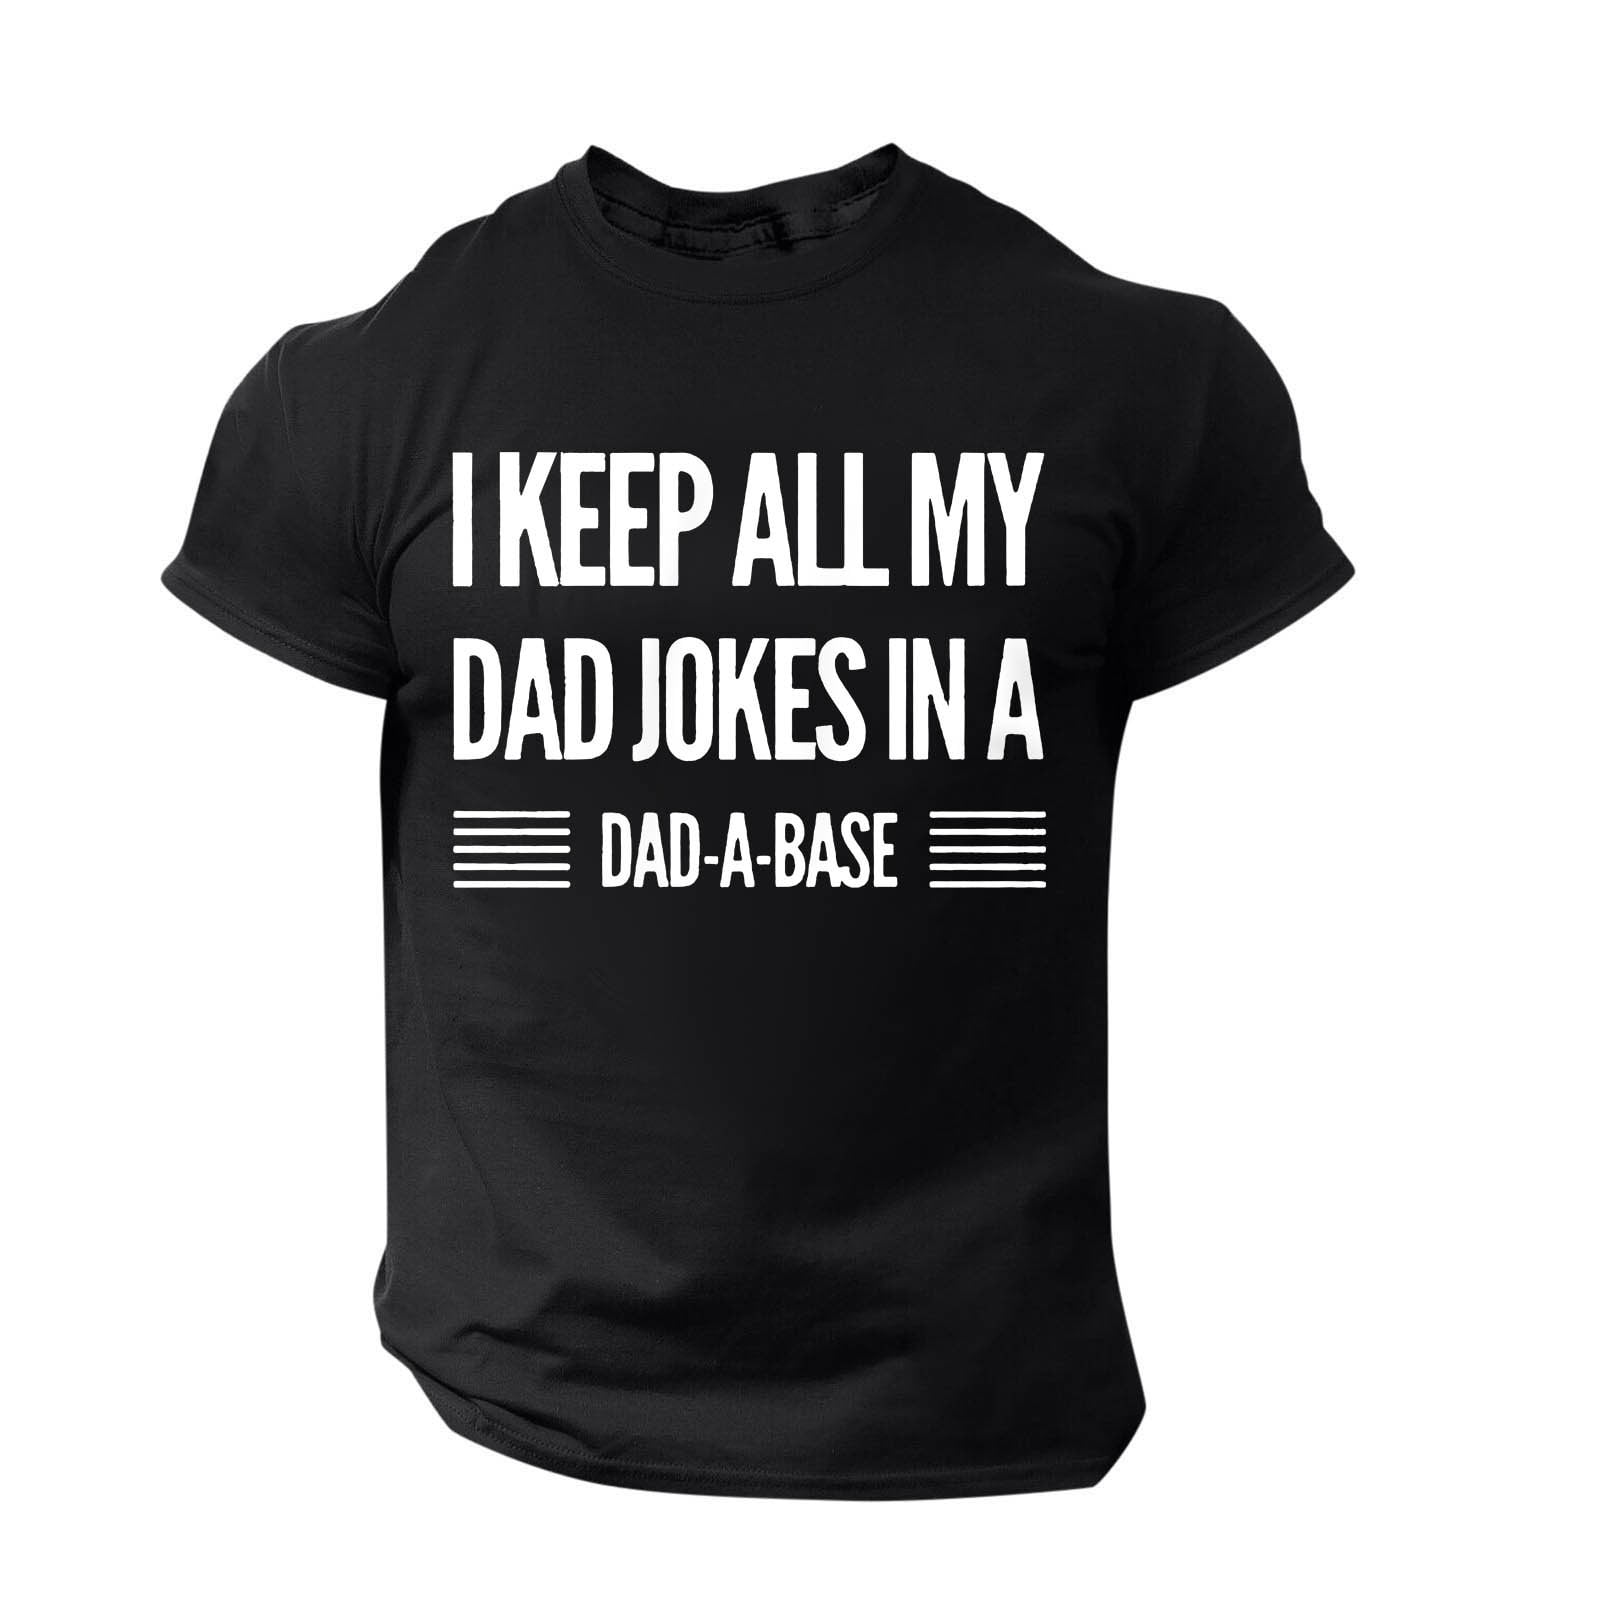 Joower Funny T Shirts For Men - Dad Tshirts Shirts For Men Mens Funny T ...